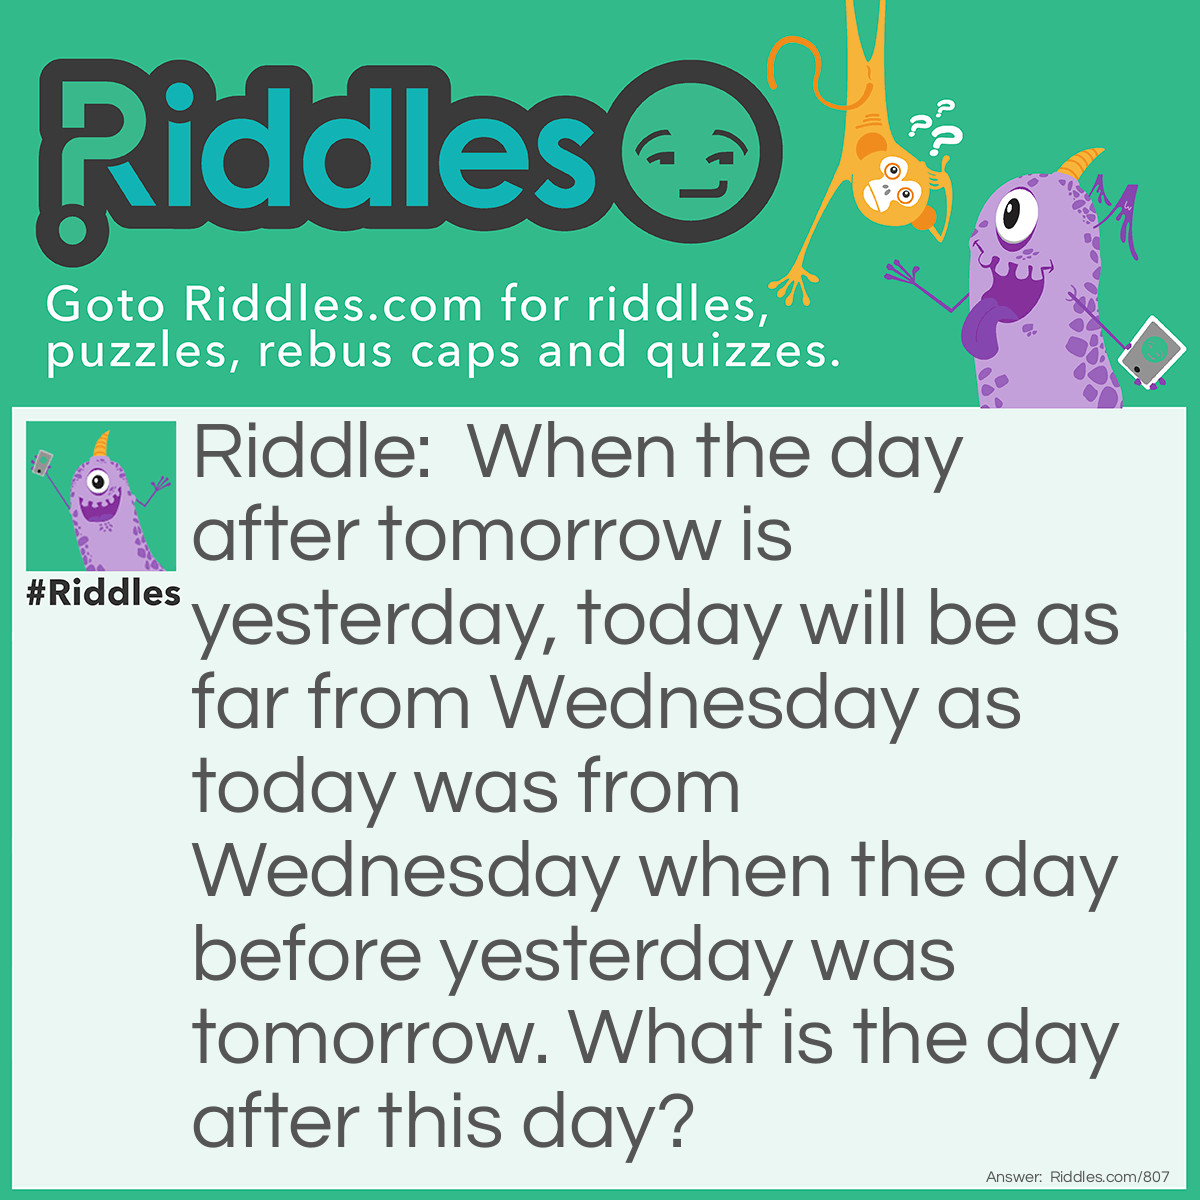 Riddle: When the day after tomorrow is yesterday, today will be as far from Wednesday as today was from Wednesday when the day before yesterday was tomorrow. What is the day after this day? Answer: The day is Thursday!